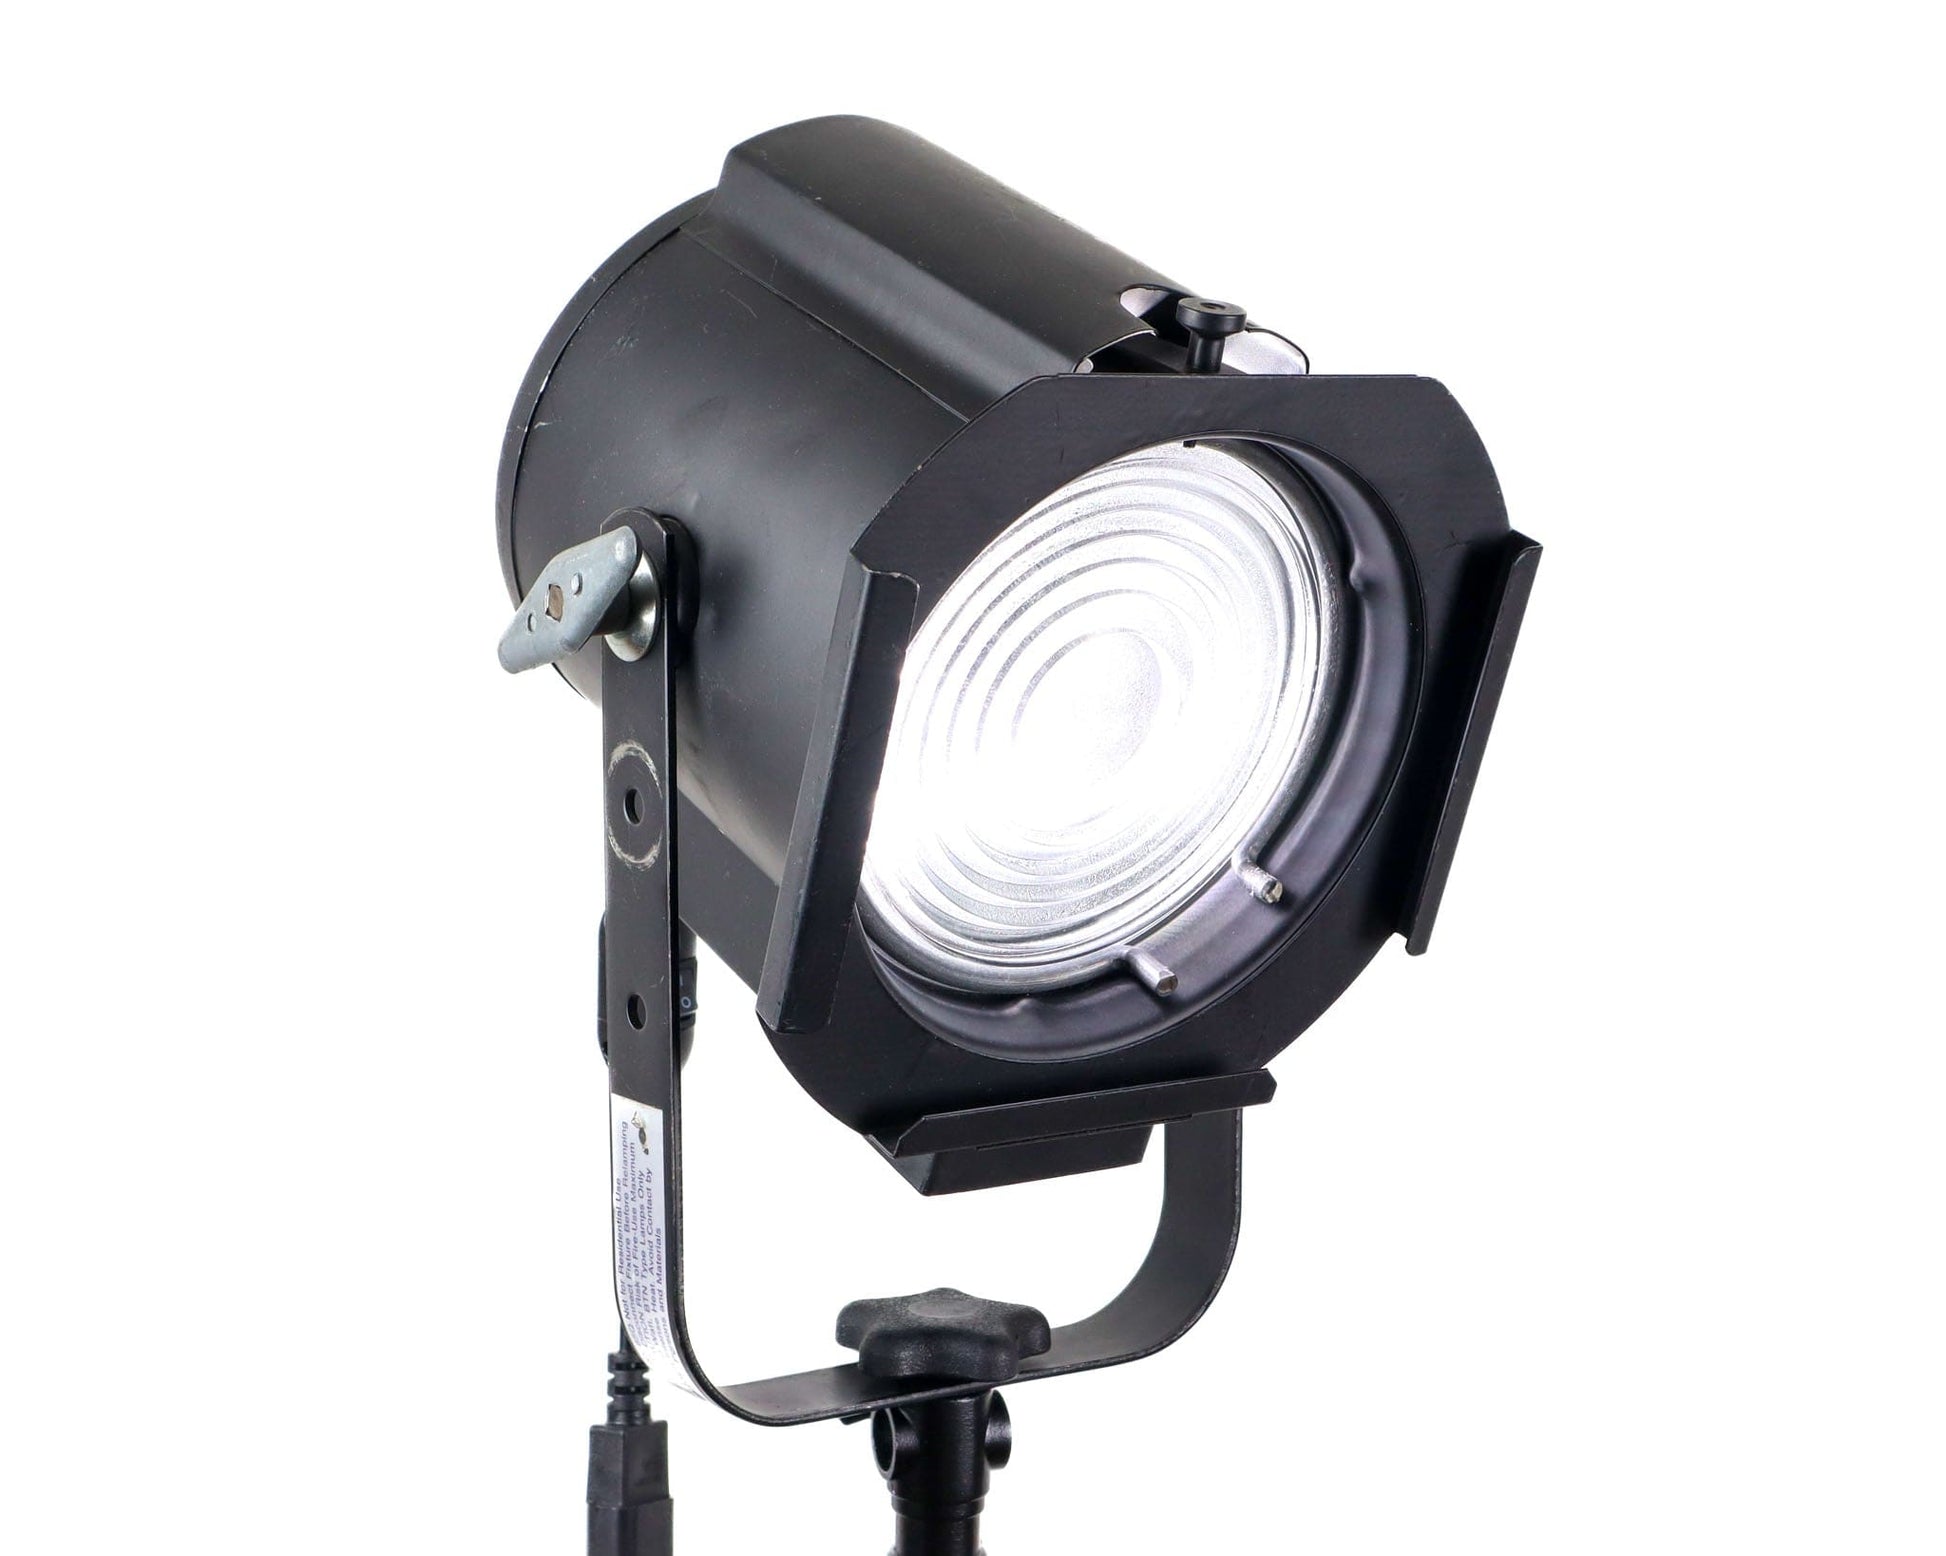 LightAndTimeArt Flood & Spot Lights Small, Black Stage light with Colored Lenses, Home Theater & Movie Room Decor